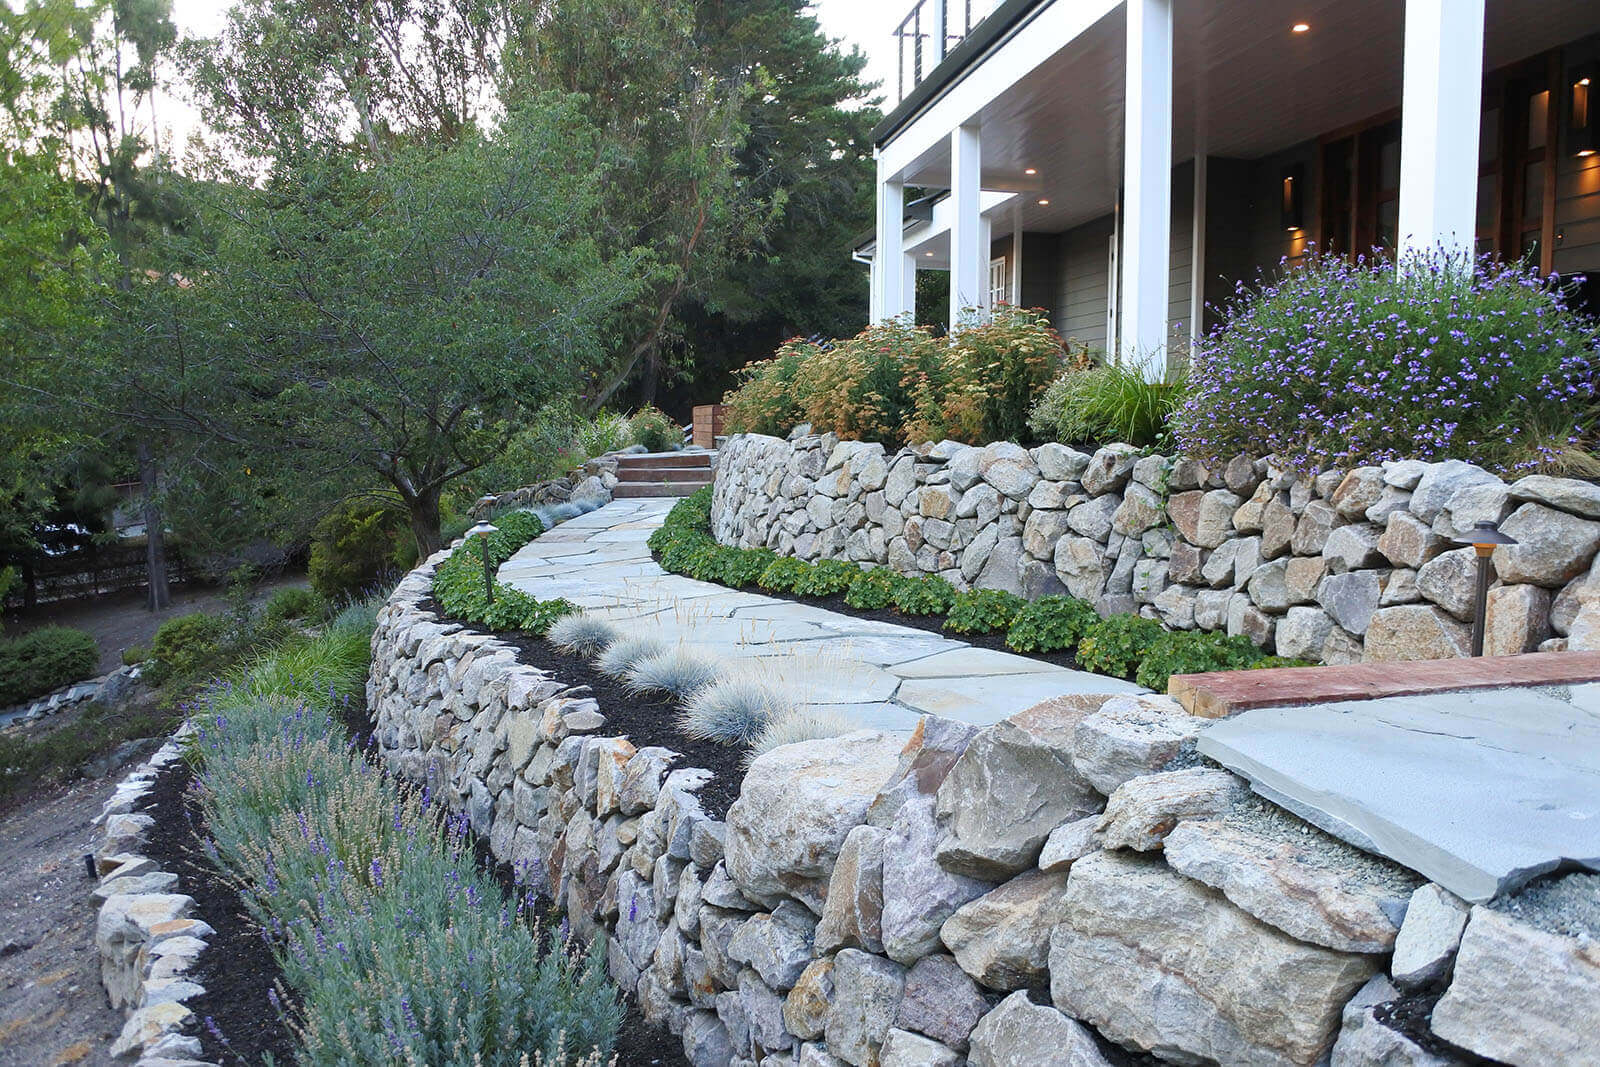 Staged garden platforms with rock walls, and stone laid pathway